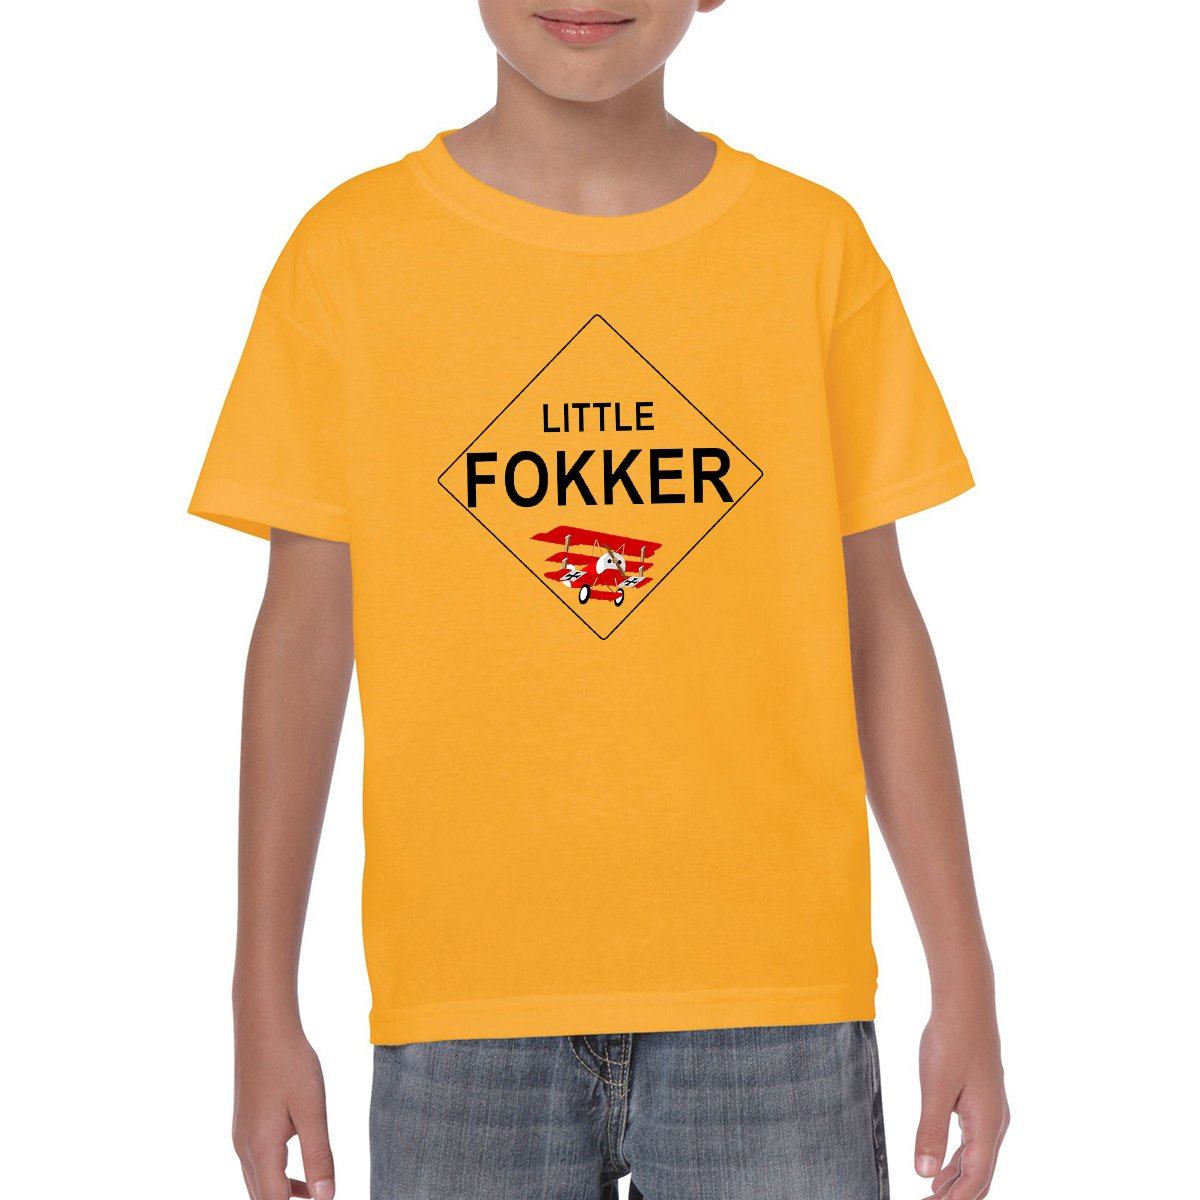 LITTLE FOKKER Youth Semi-Fitted T-Shirt